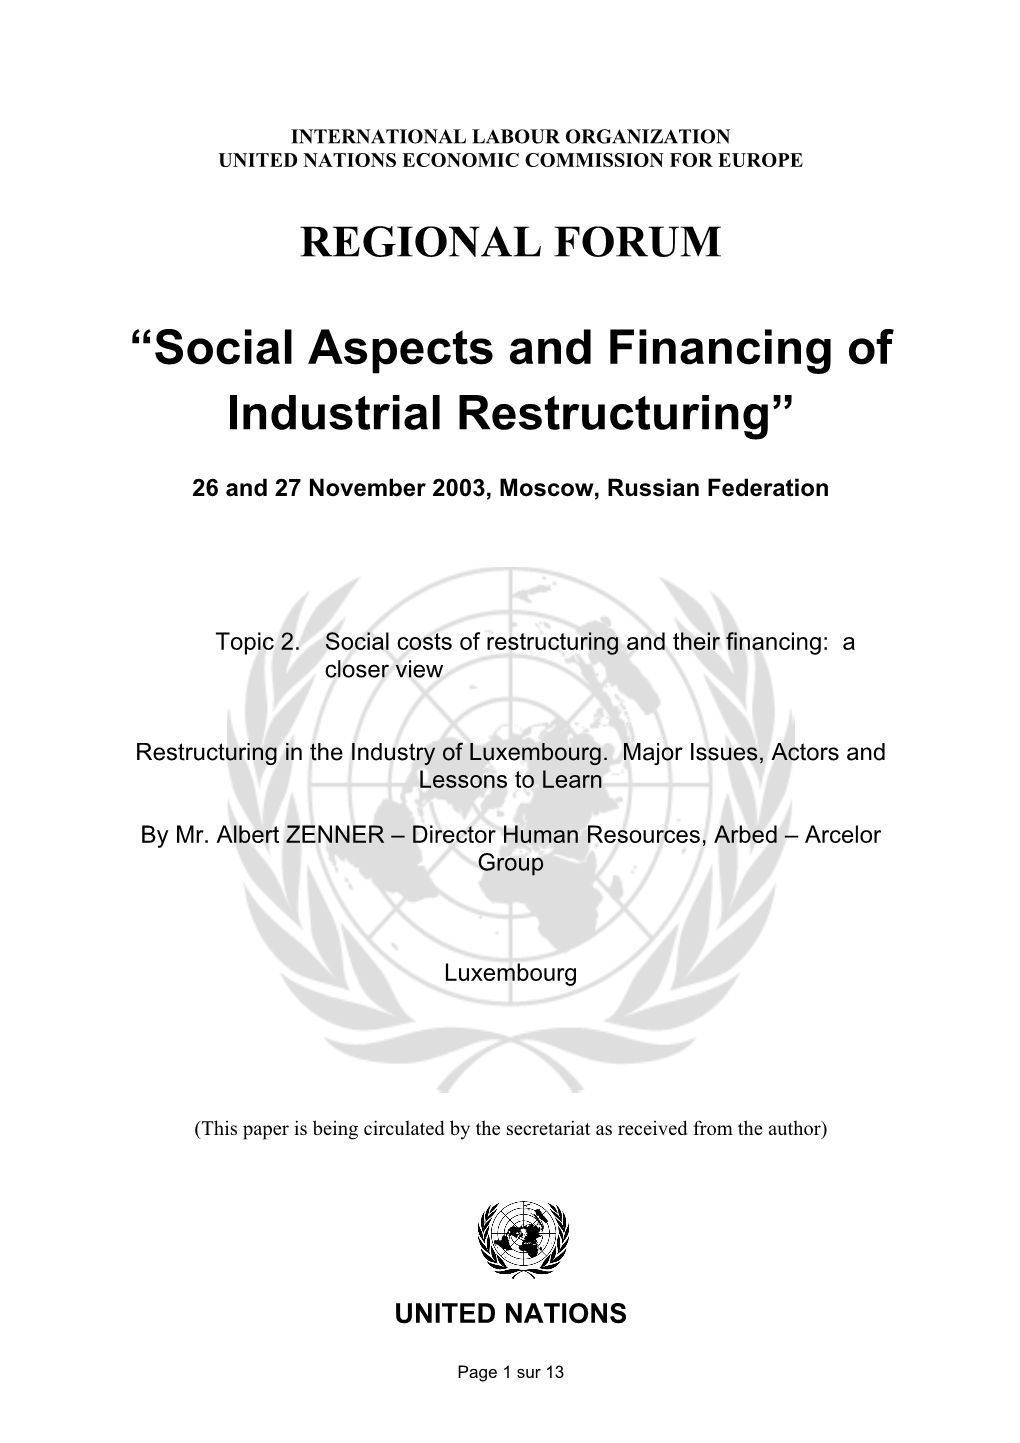 “Social Aspects and Financing of Industrial Restructuring”